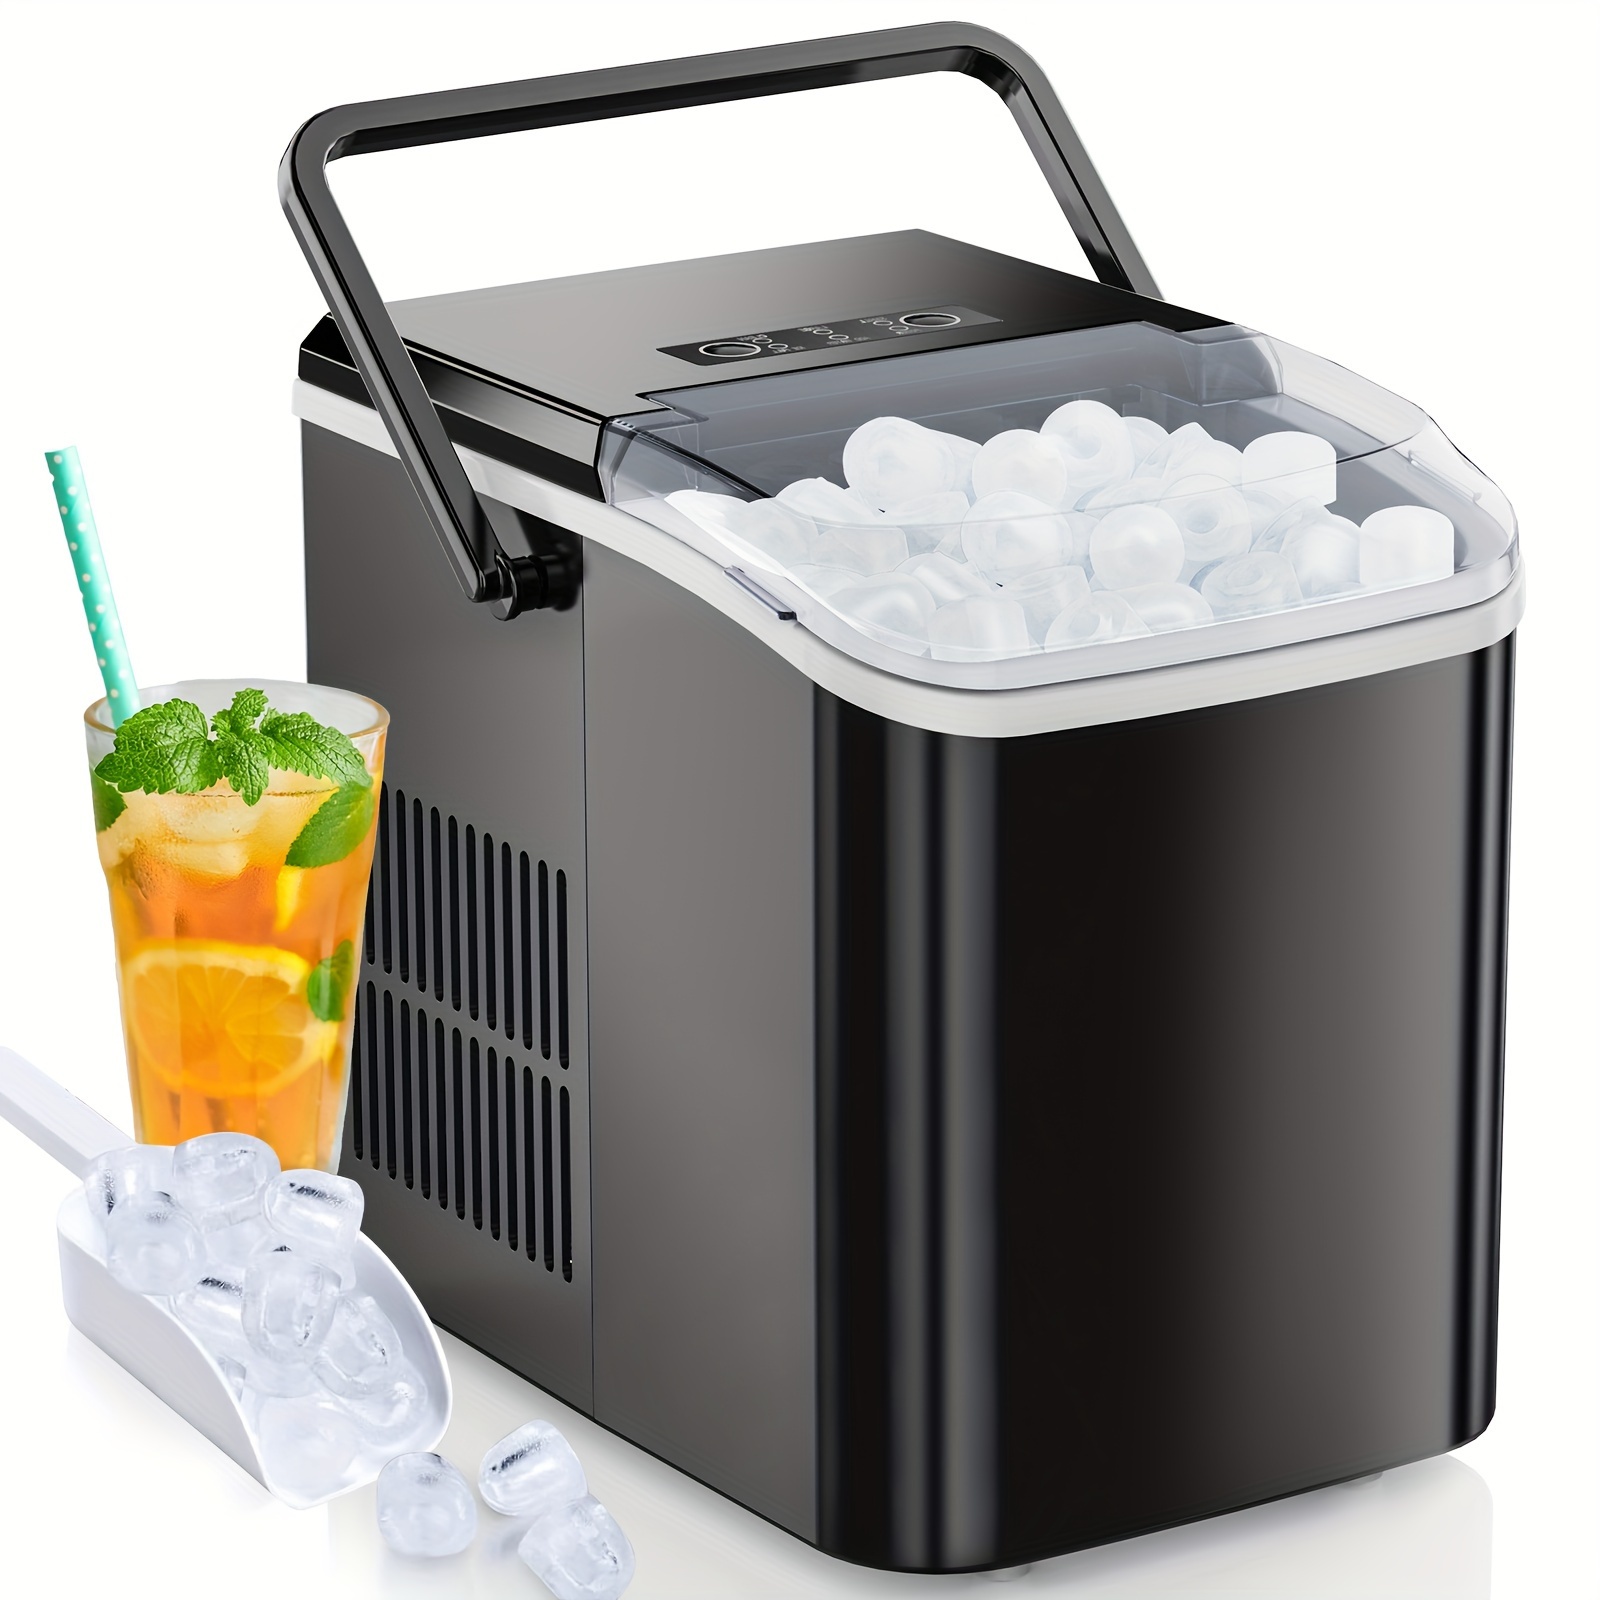 

Countertop Ice Maker, Portable Ice Machine Self-cleaning, 9 Cubes In 6 Mins, 26.5lbs/24hrs, 2 Sizes Of Bullet Ice, With Ice Scoop, Basket And Handle, Ice Cube Maker For Home Kitchen Party, Black